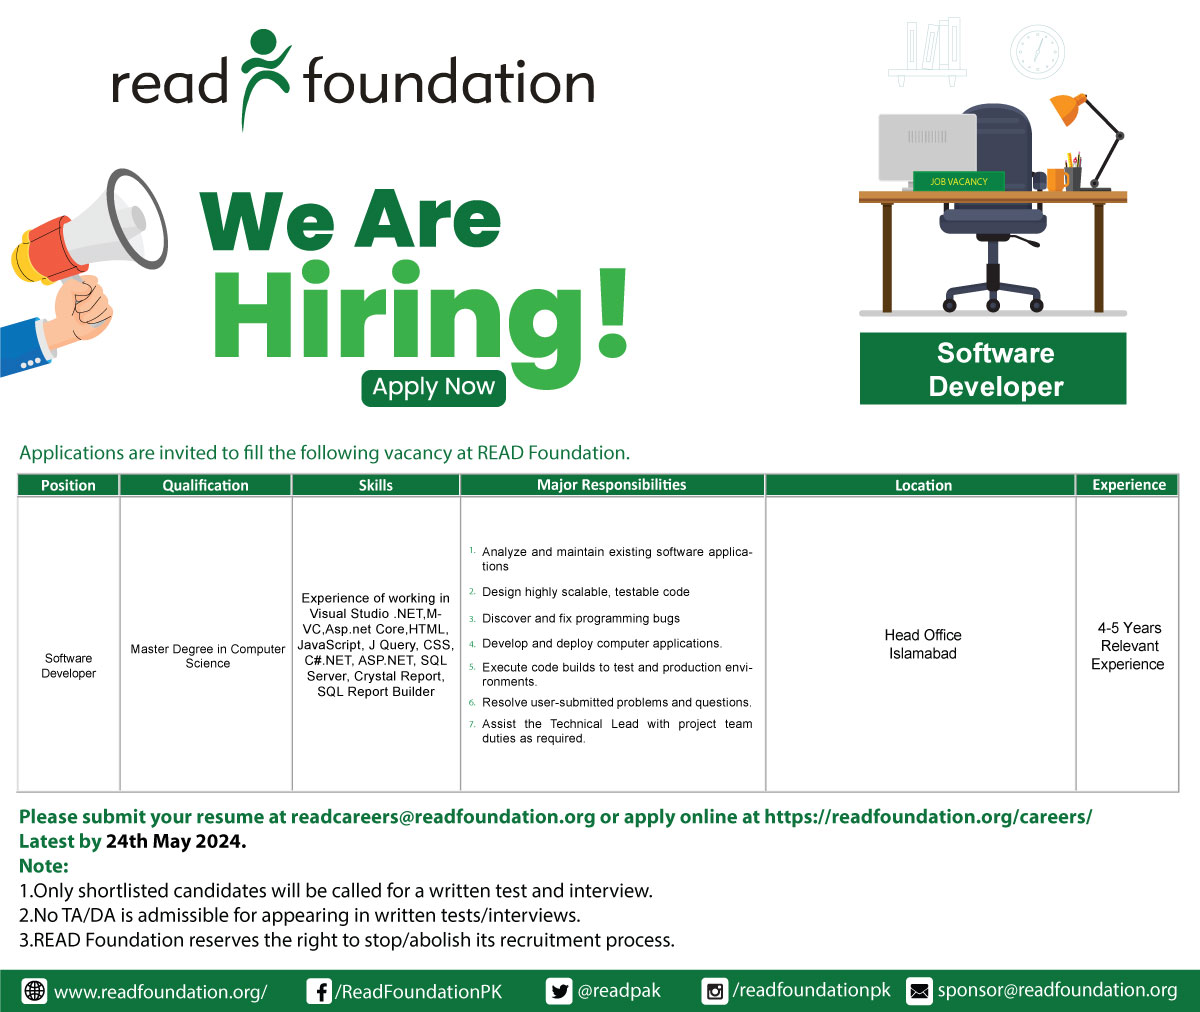 Job Alert!!! Looking for passionate, talented individuals to join our team and thrive in a dynamic work environment. Please apply at the given link: readfoundation.org/careers/ (For any queries, please get in touch with us at +92 051 8482157 during office hours). #READFoundation